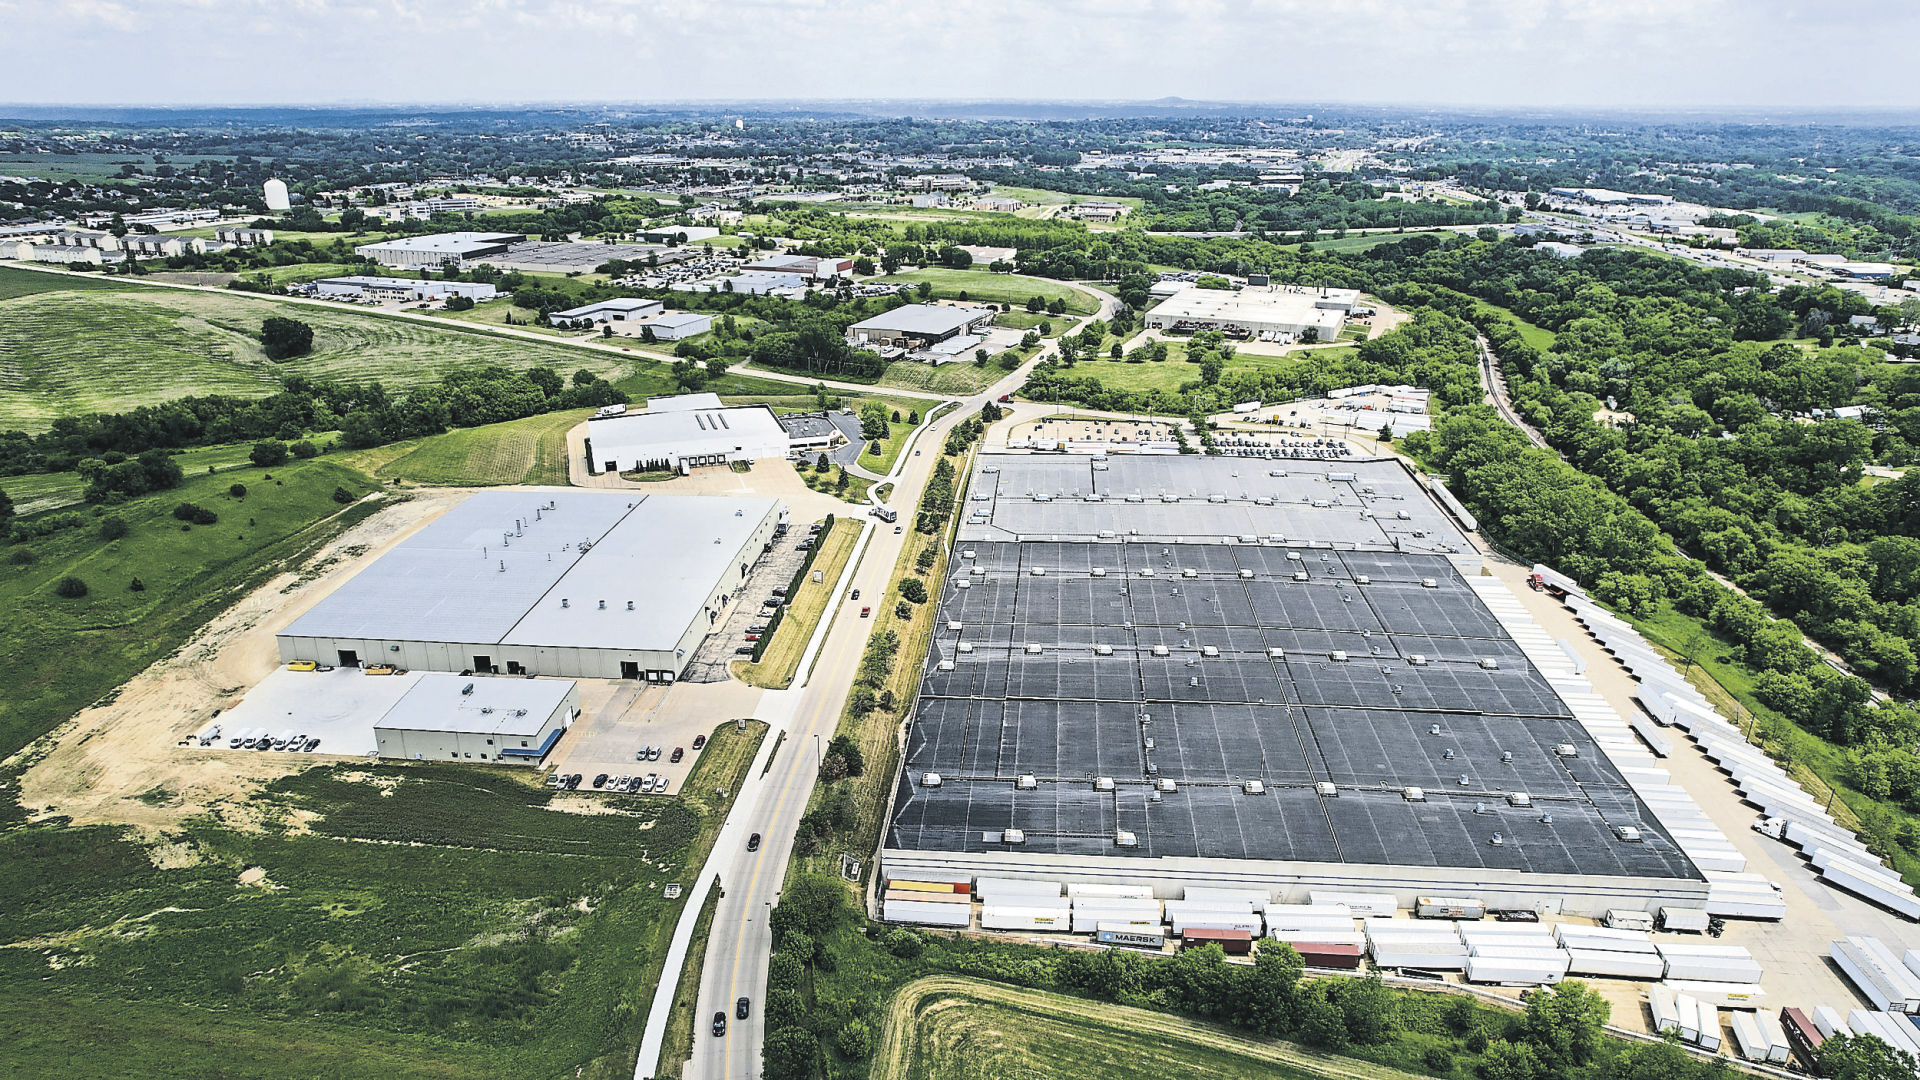 Businesses fill Dubuque’s Industrial Park along Chavenelle Road.    PHOTO CREDIT: Dave Kettering